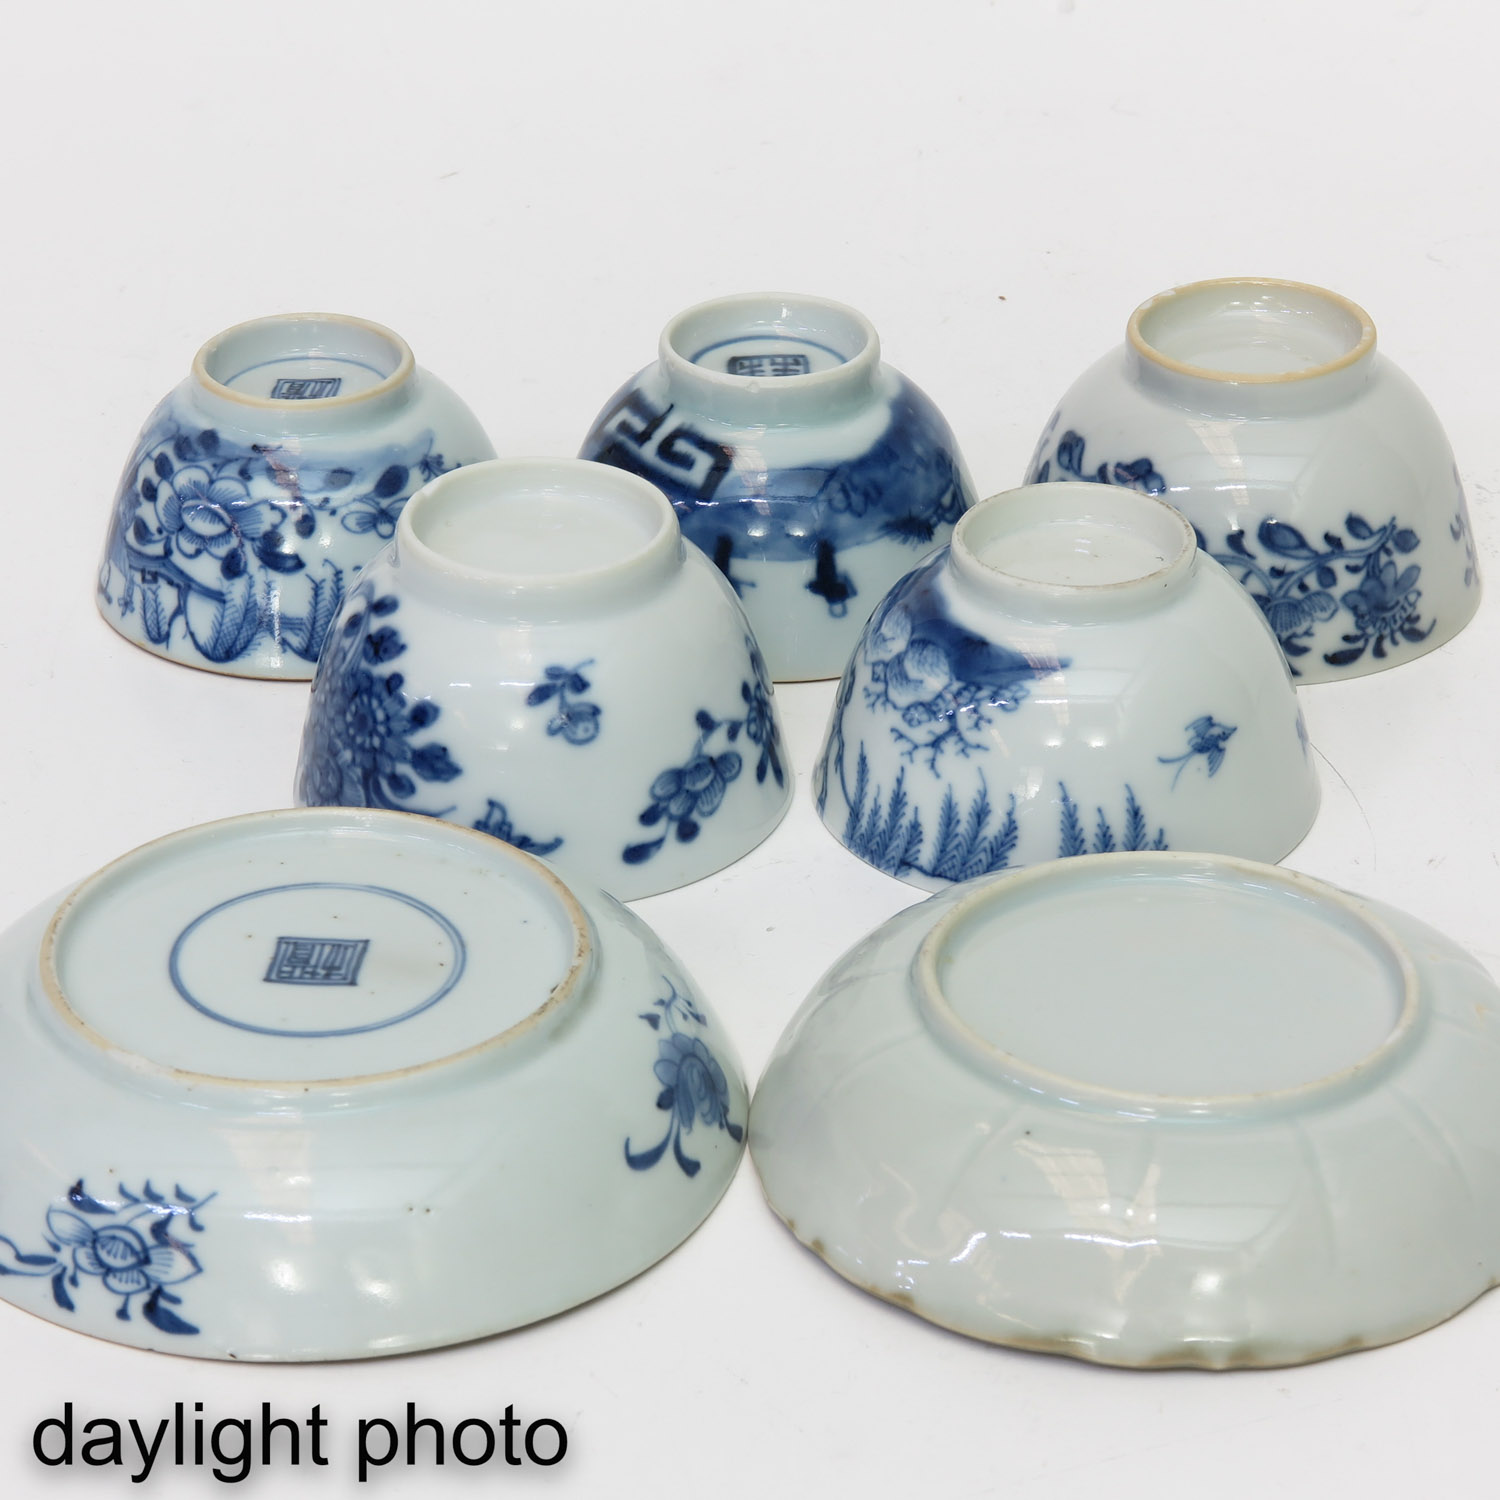 A Collection of Cups and Saucers - Image 10 of 10